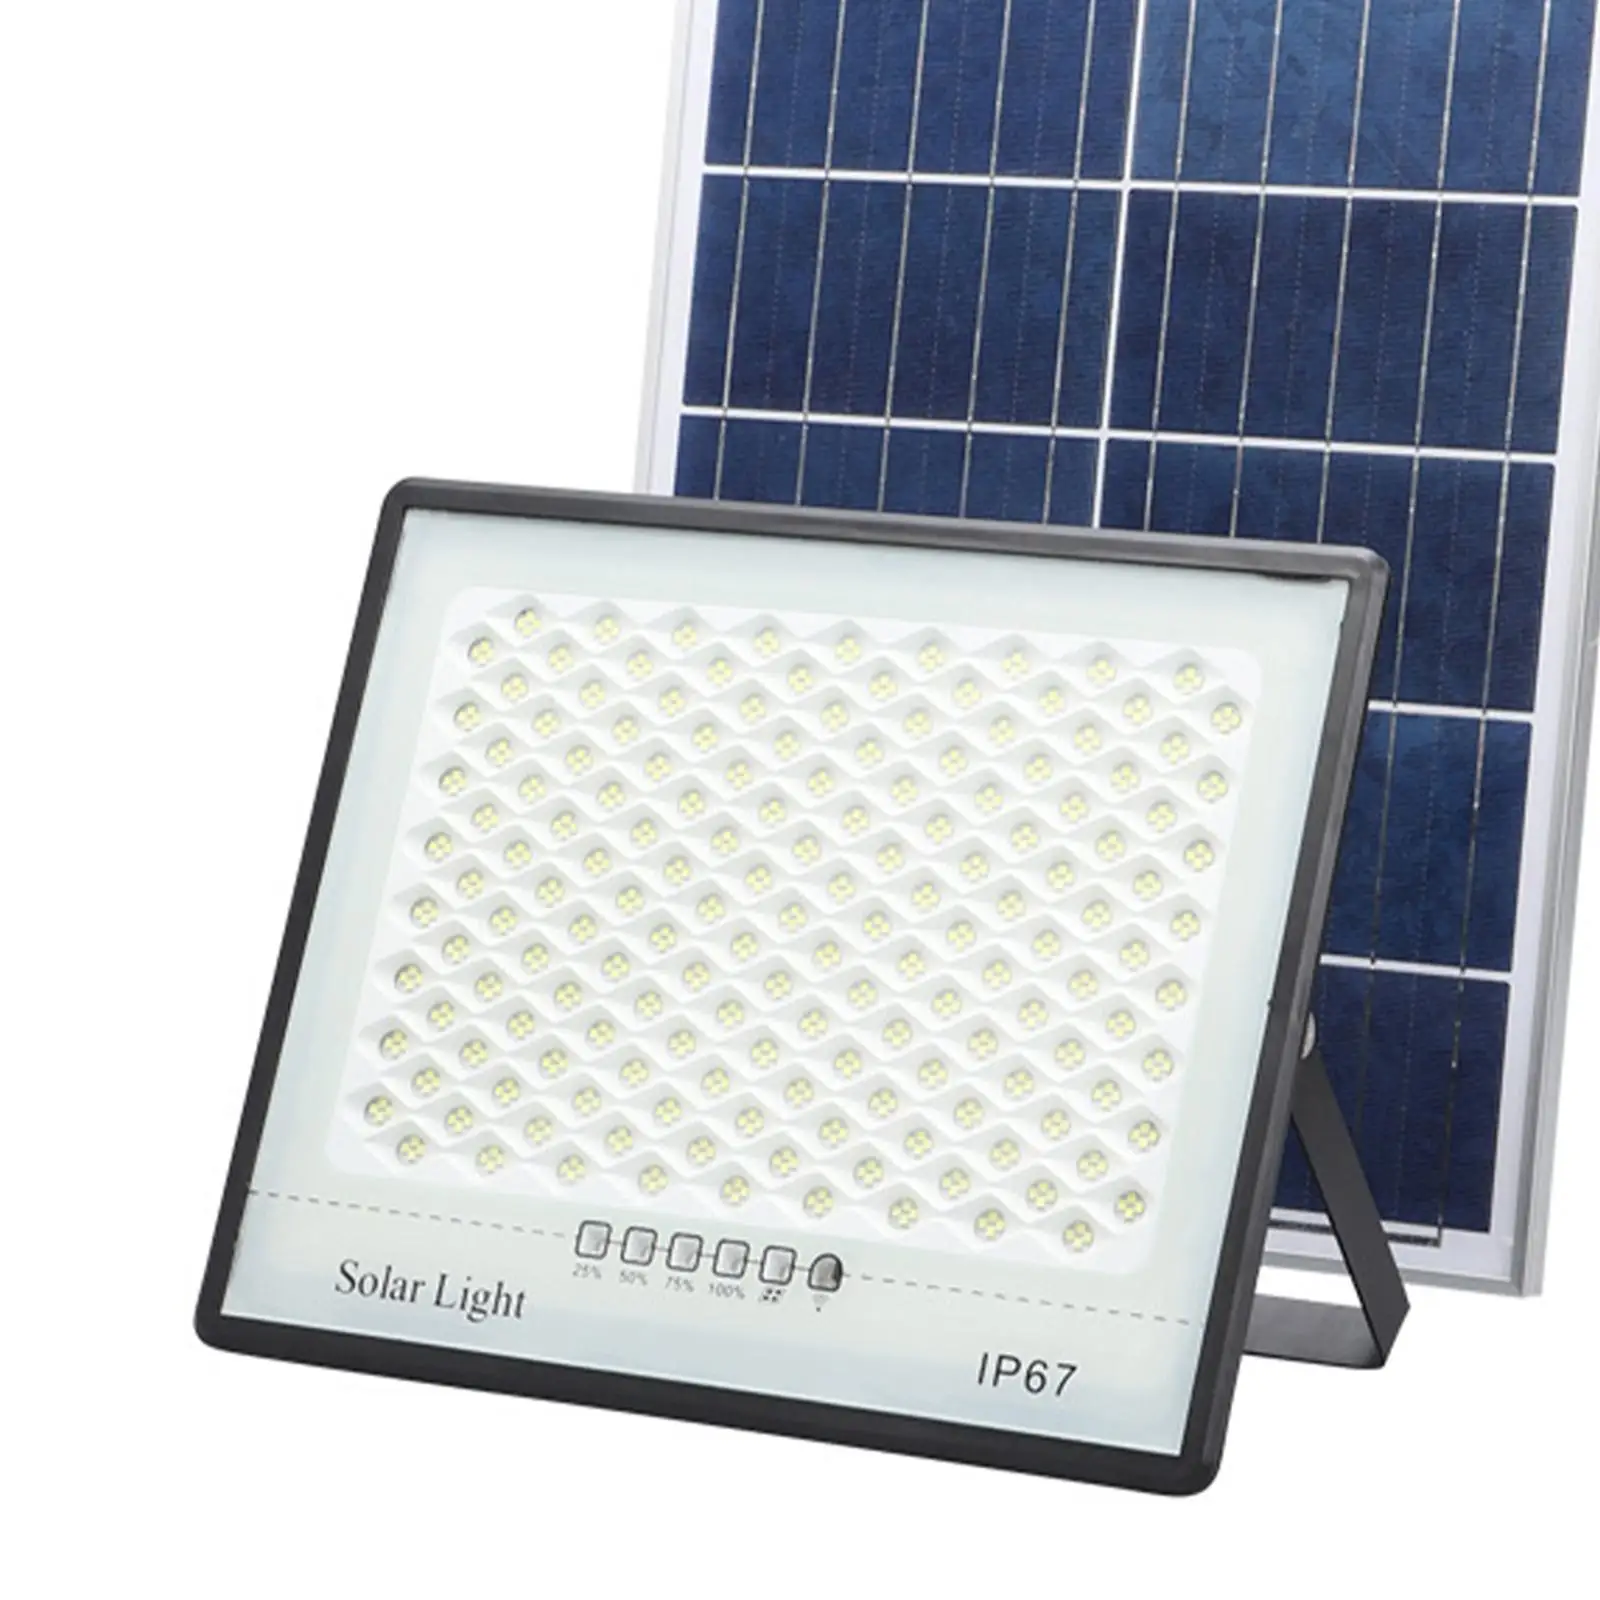 Solar Light Solar Lights IP67 Waterproof with Remote Control 100W Wall LED Spotlights for Yard Pathway Garden Shed Swimming Pool